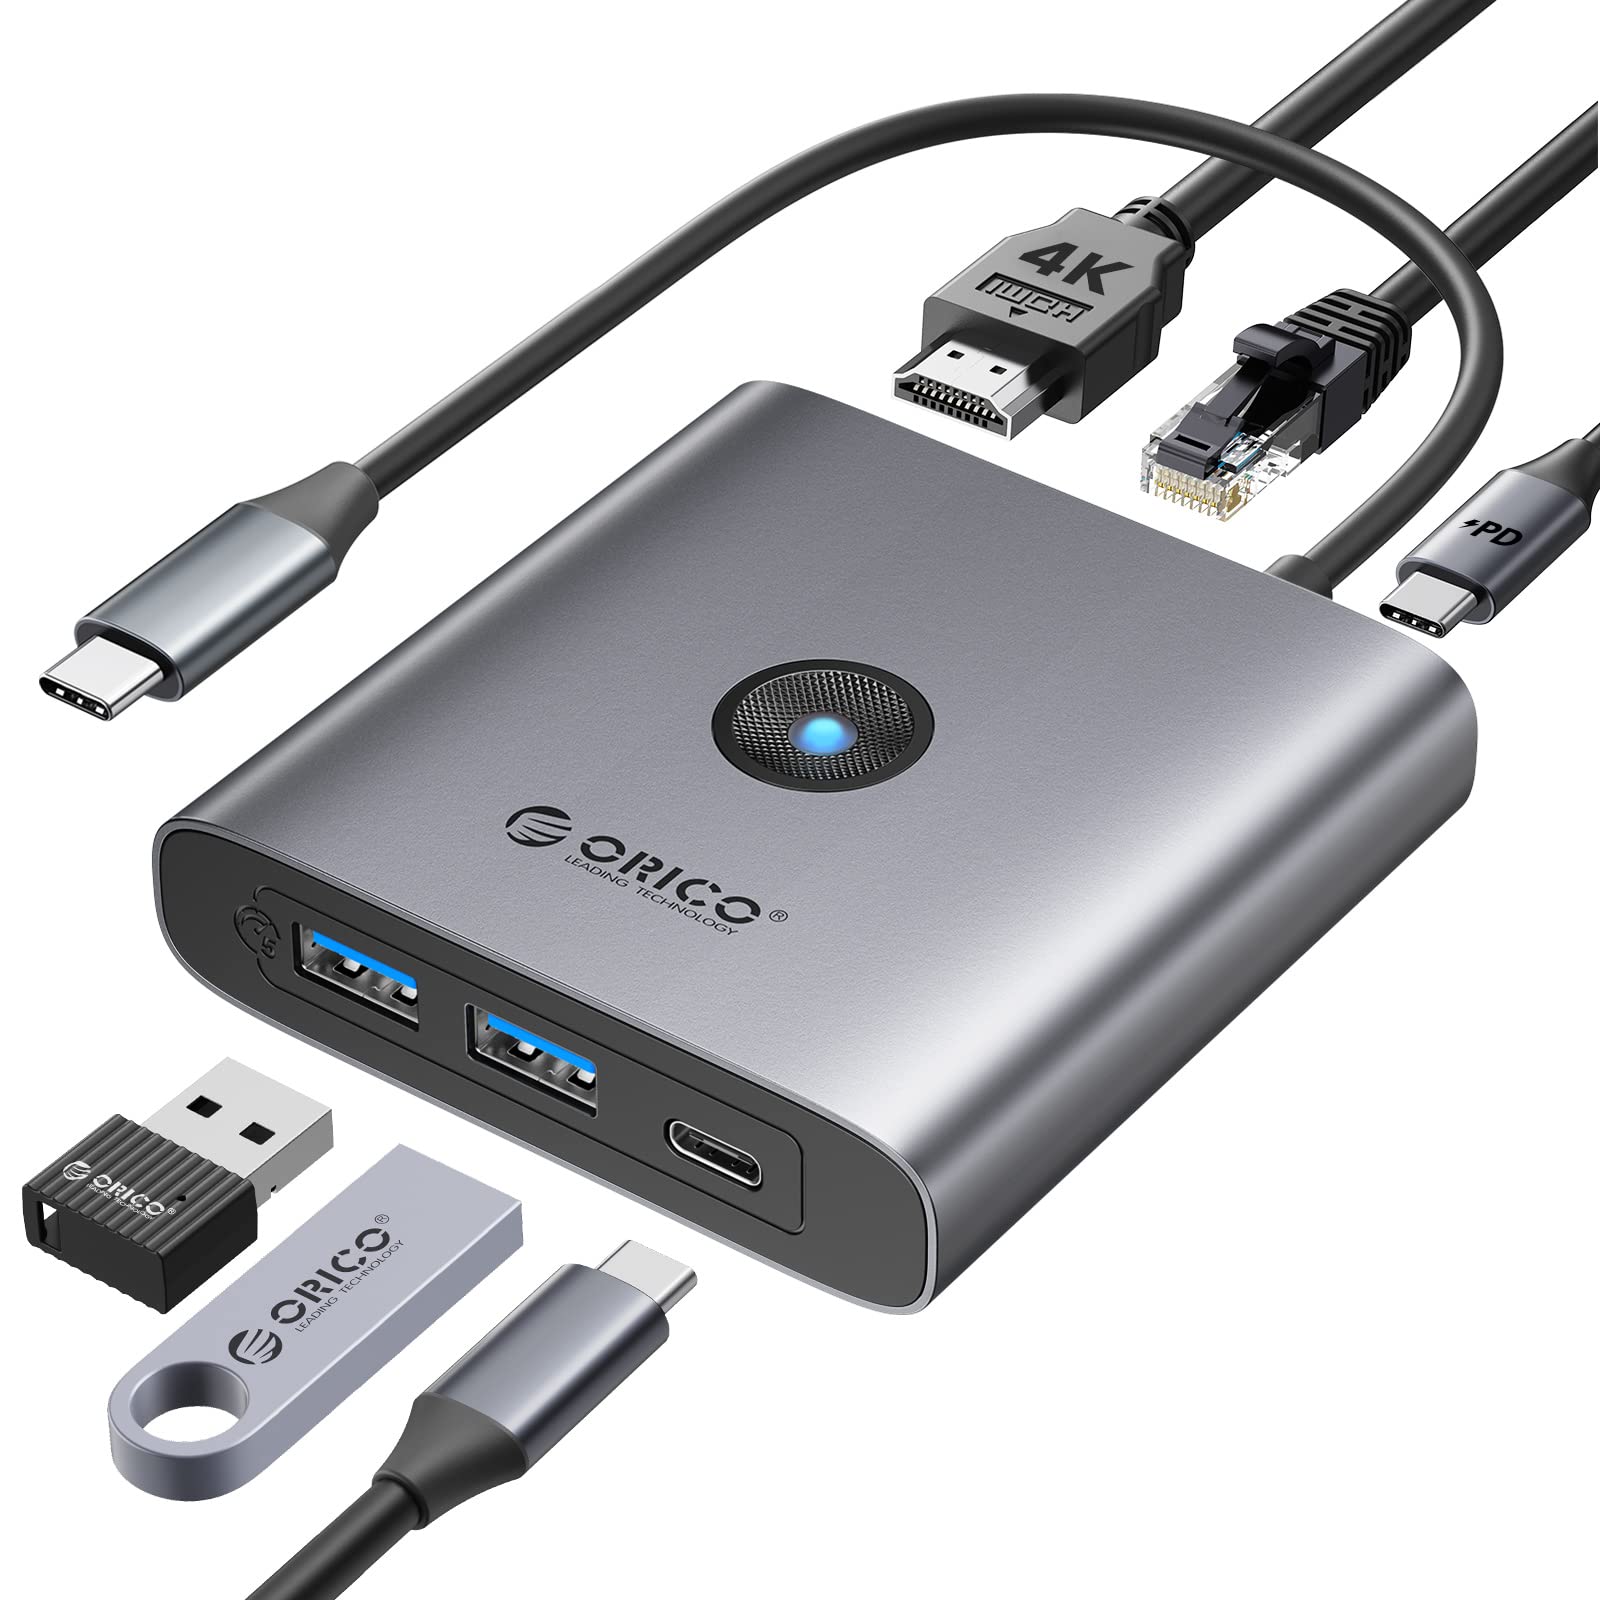 Limited Time Deal: ORICO 6-in-1 USB C Hub for $17.08